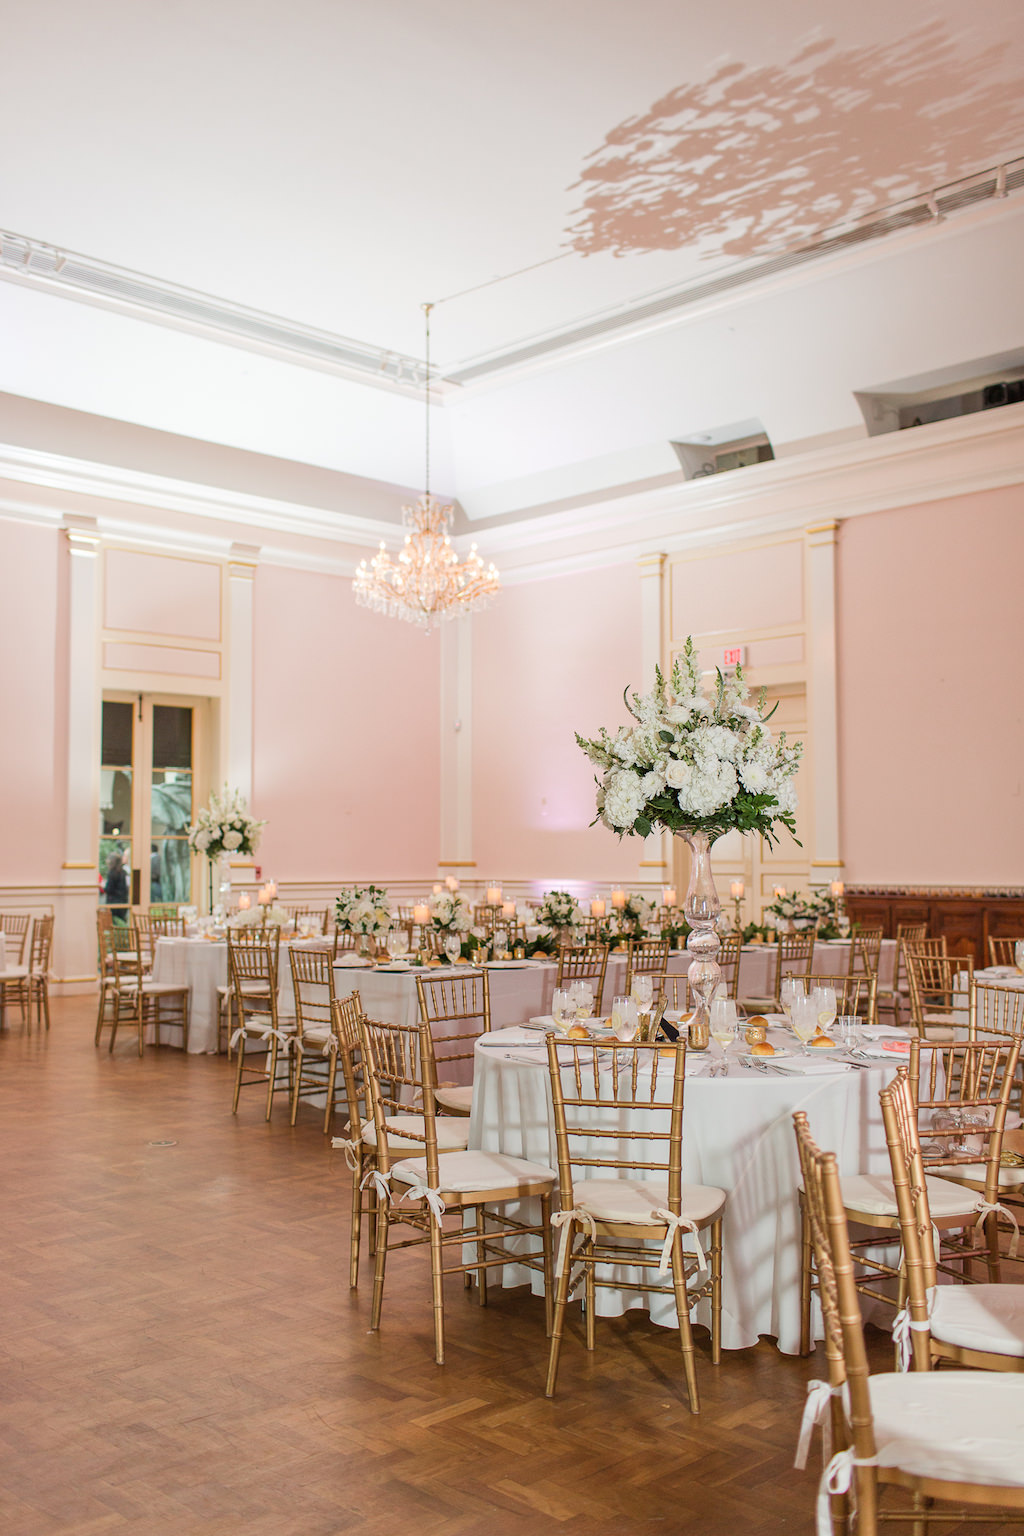 Classic, Romantic, Elegant Timeless Ballroom Wedding Reception Decor, Round Tables with White Linens, Gold Chiavari Chairs, Tall White Floral Centerpiece | St. Petersburg Wedding Venue Museum of Fine Arts | Wedding Rentals Olympia Catering